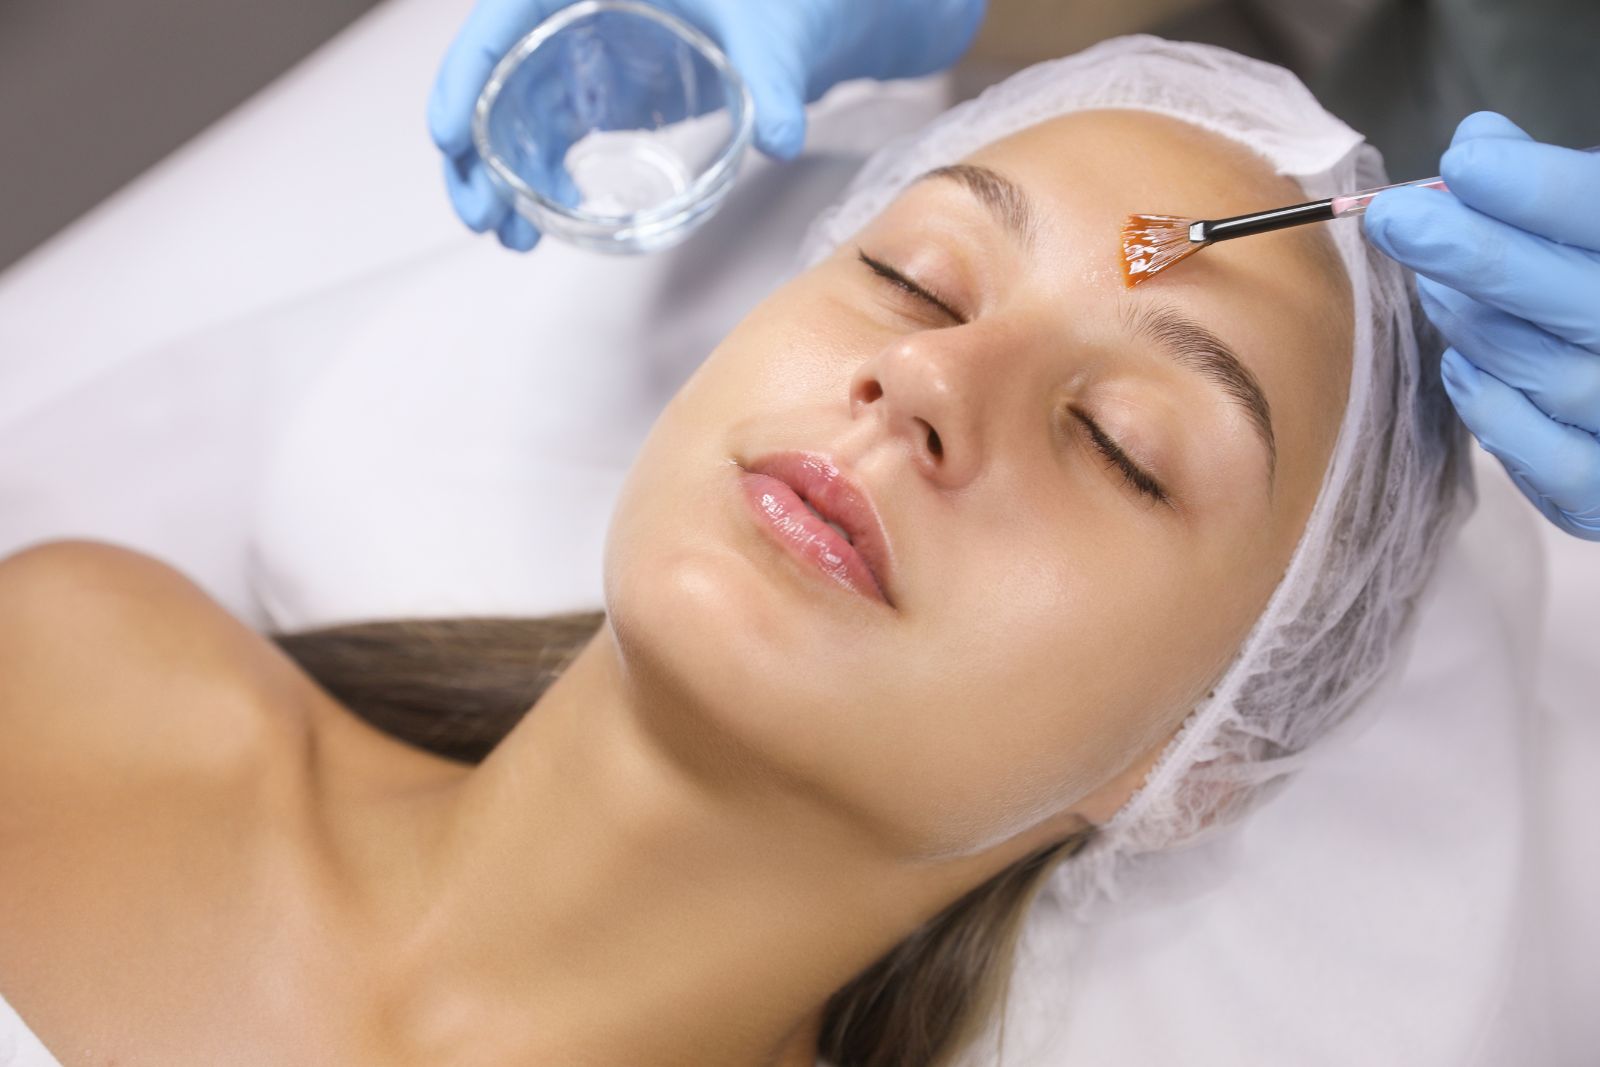 A woman receiving a facial treatment with a brush, lying down with her eyes closed, as a professional in gloves applies a product to her face.